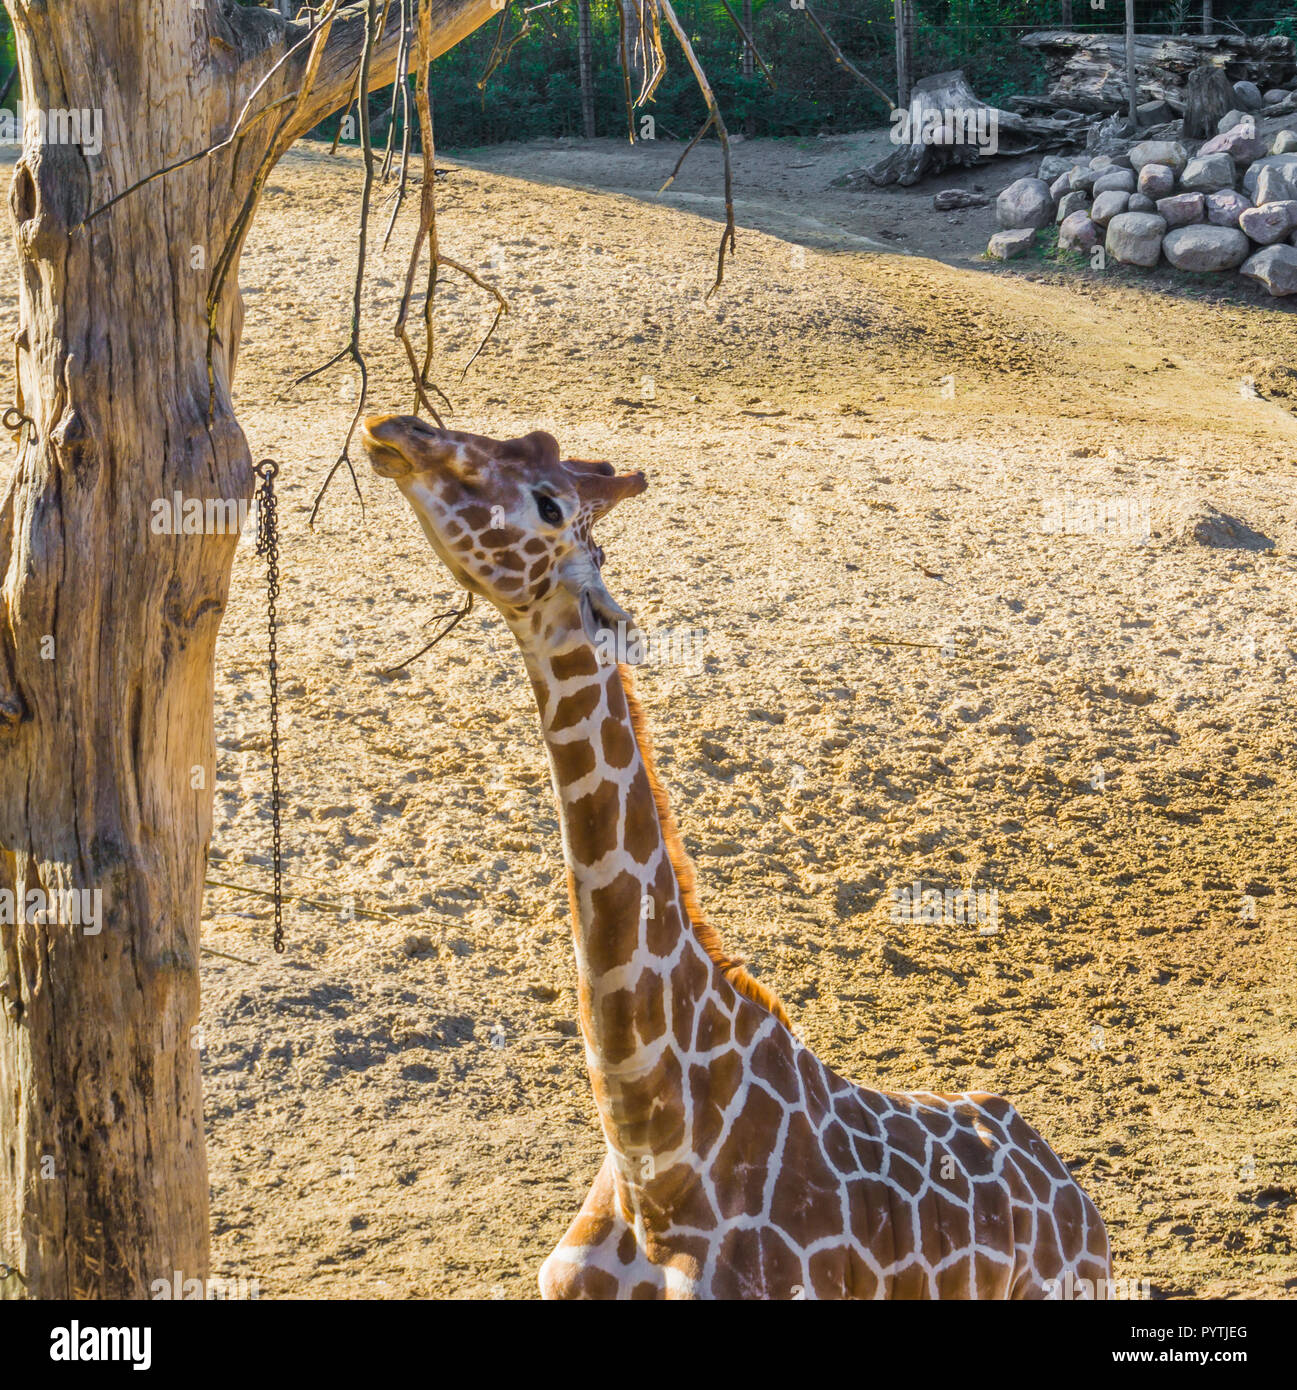 giraffe reaching with his long neck and eating from a tree branch african savanna animal portrait Stock Photo